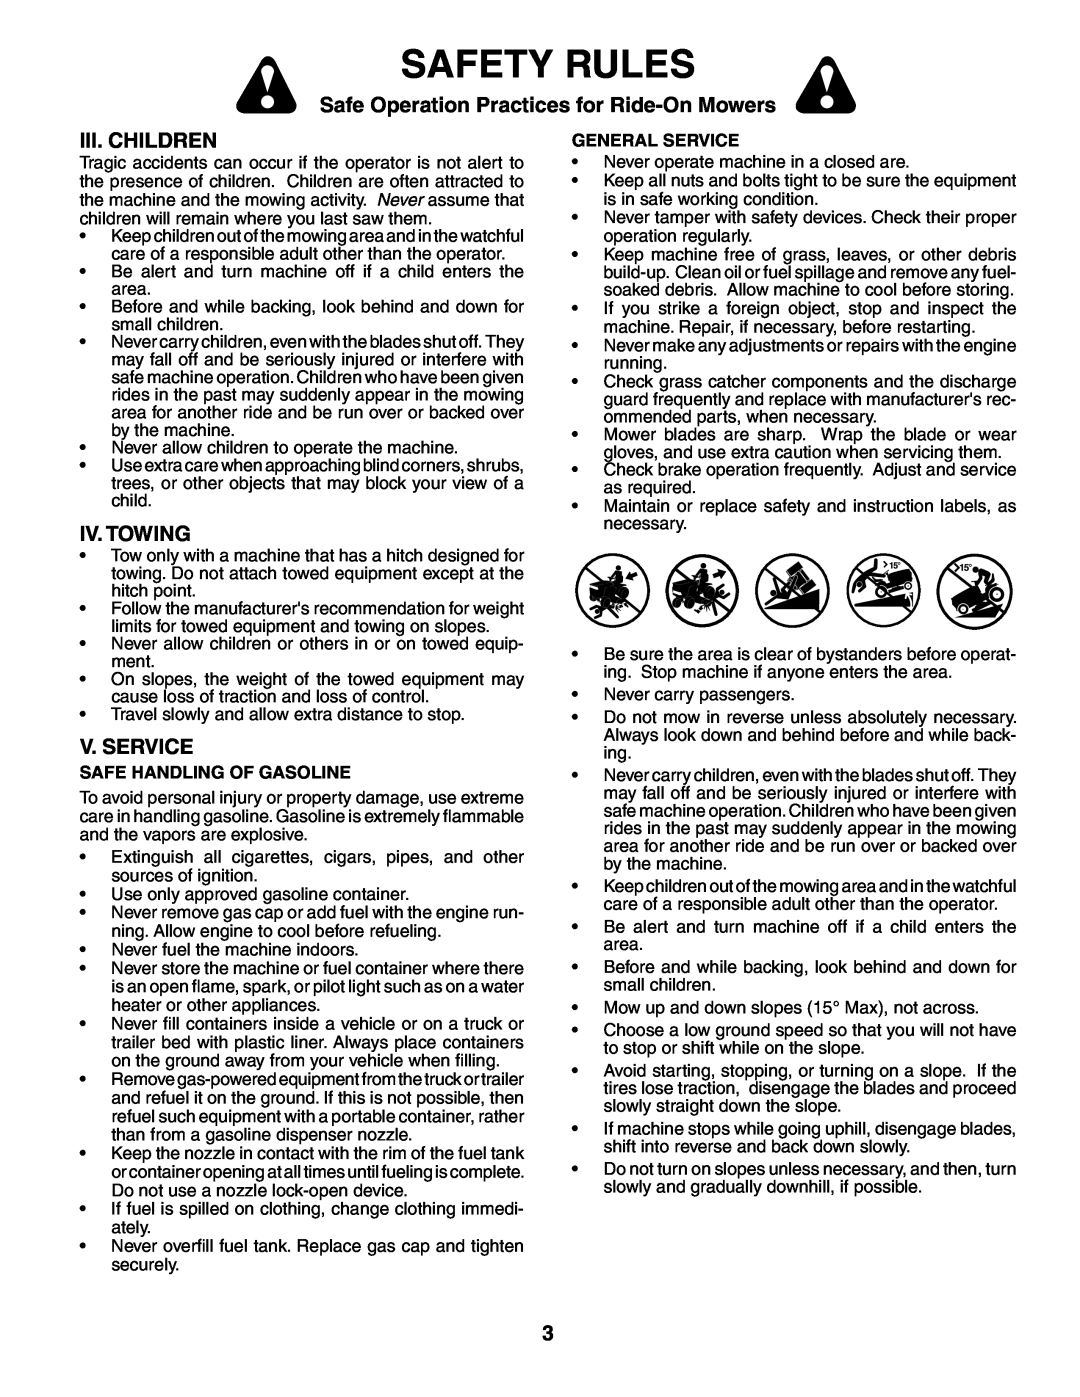 Poulan HD21H42 manual Iii. Children, Iv. Towing, V. Service, Safety Rules, Safe Operation Practices for Ride-On Mowers 